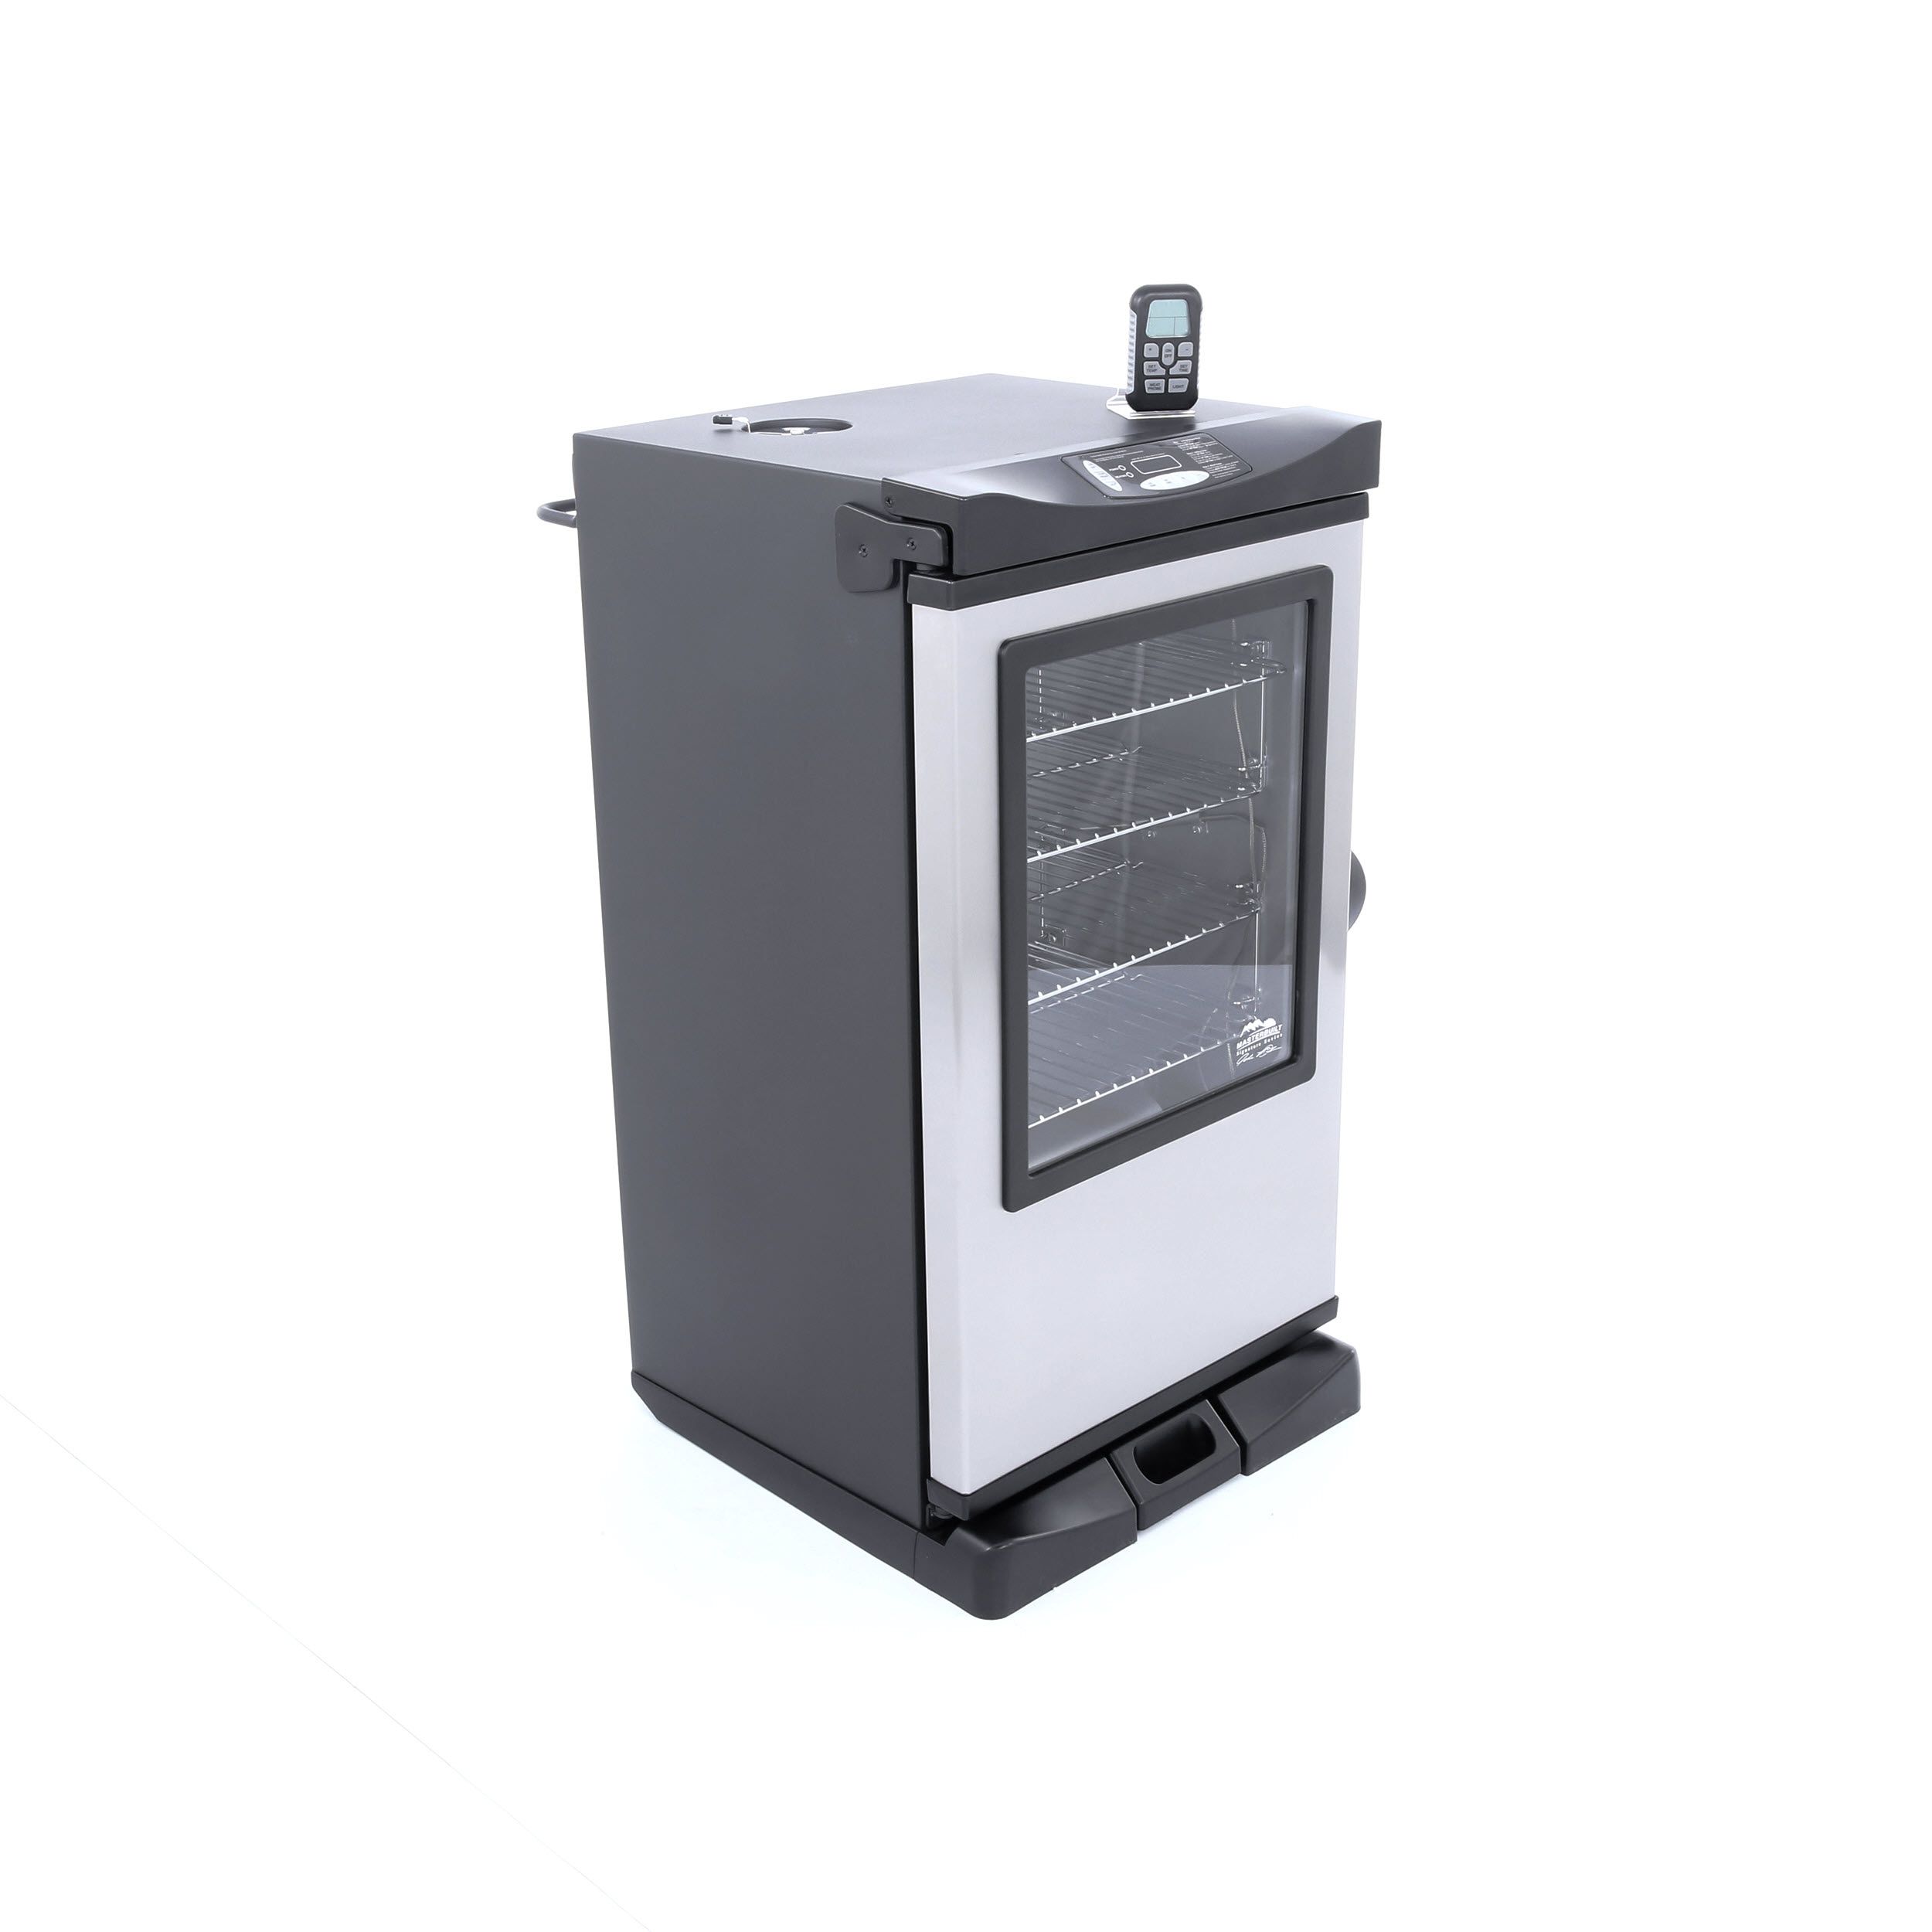 Masterbuilt JMSS 721-Sq in Silver Electric Smoker at Lowes.com